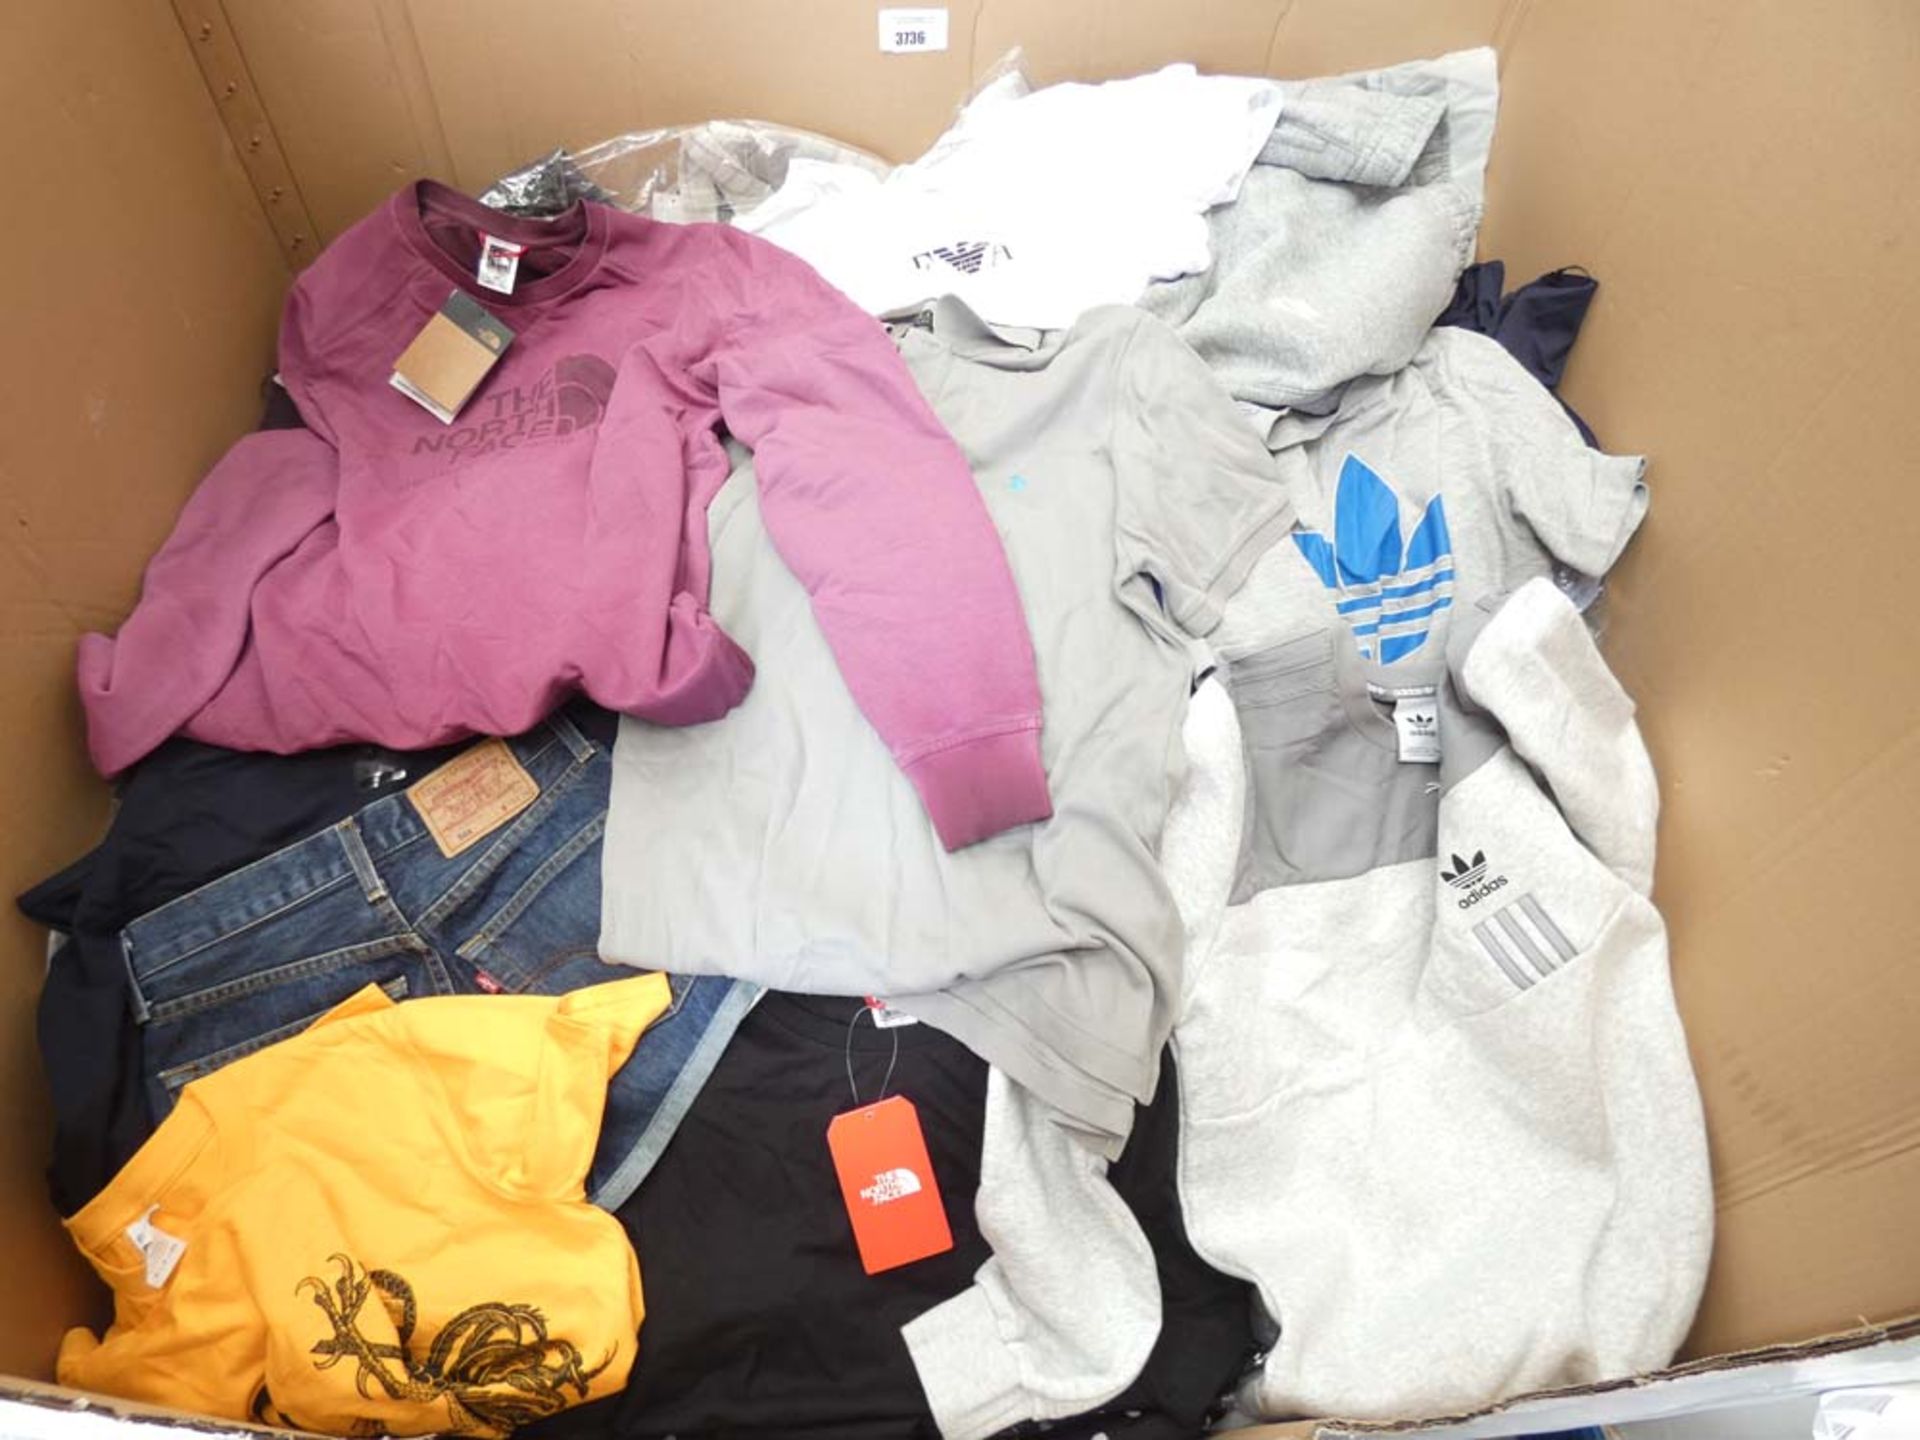 Large pallet box containing lady's and gent's assorted clothing